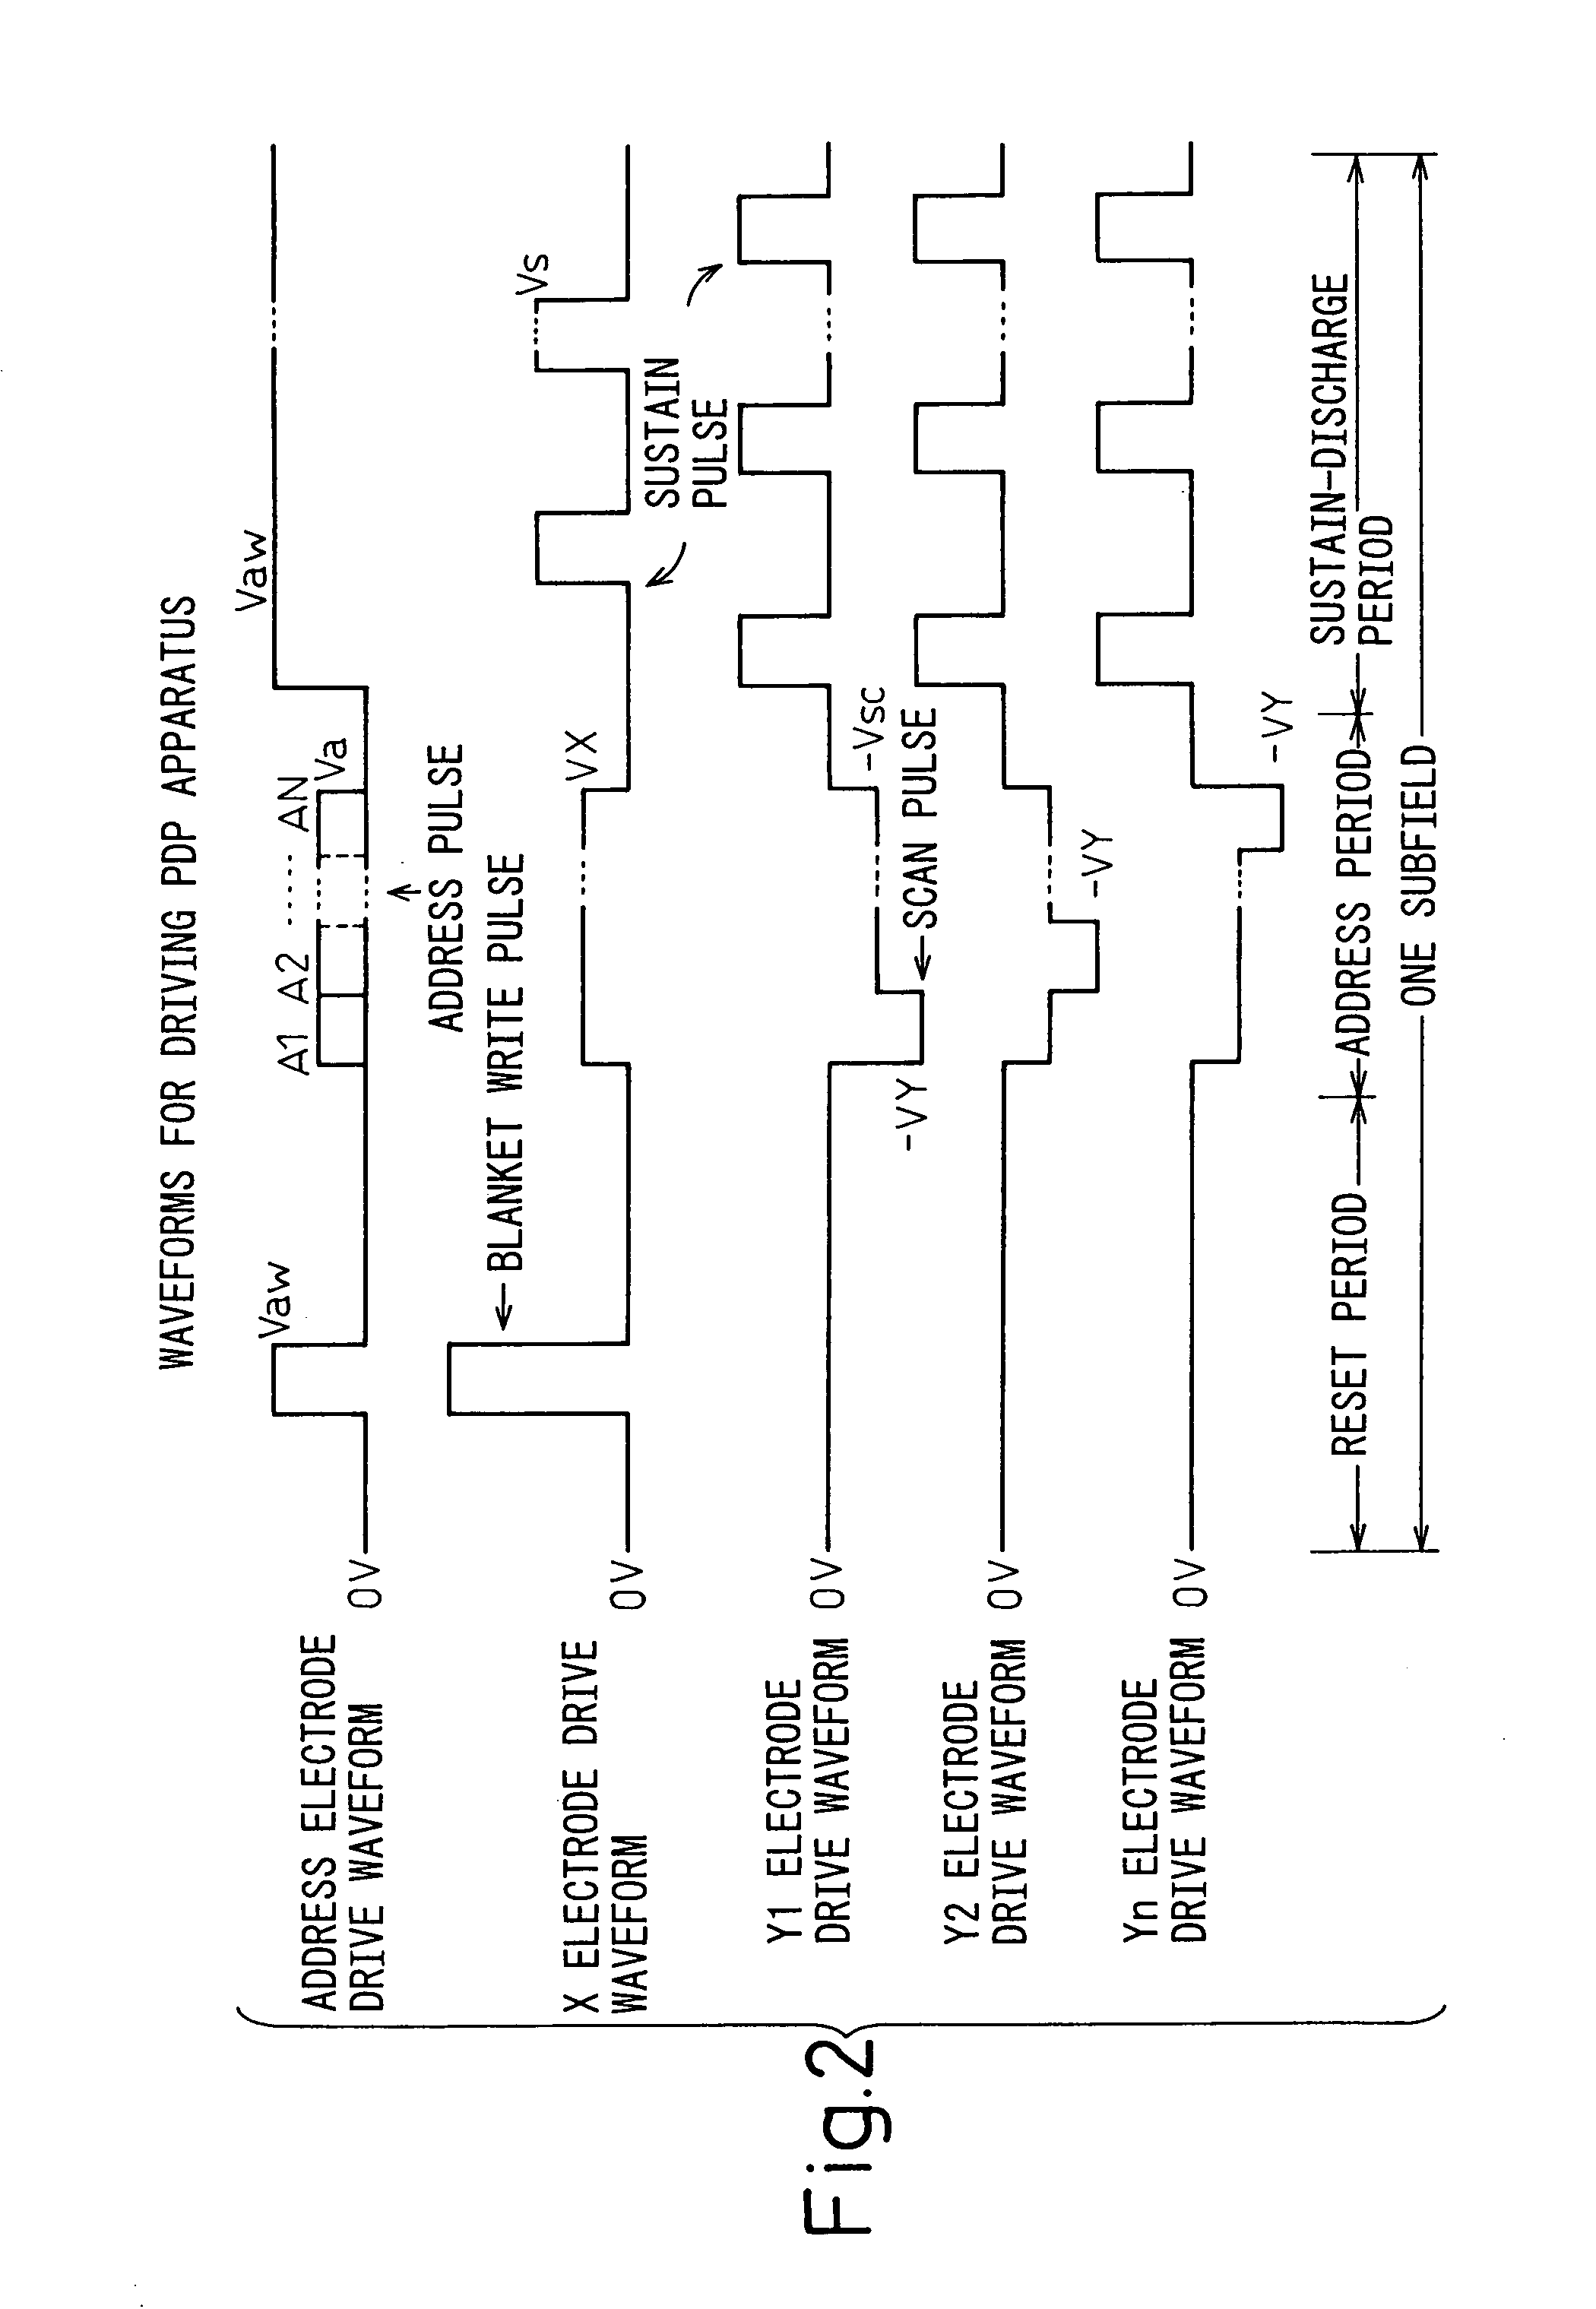 Capacitive load driving circuit driving capacitive loads such as pixels in plasma display panels and plasma display apparatus having the capacitive load driving circuit